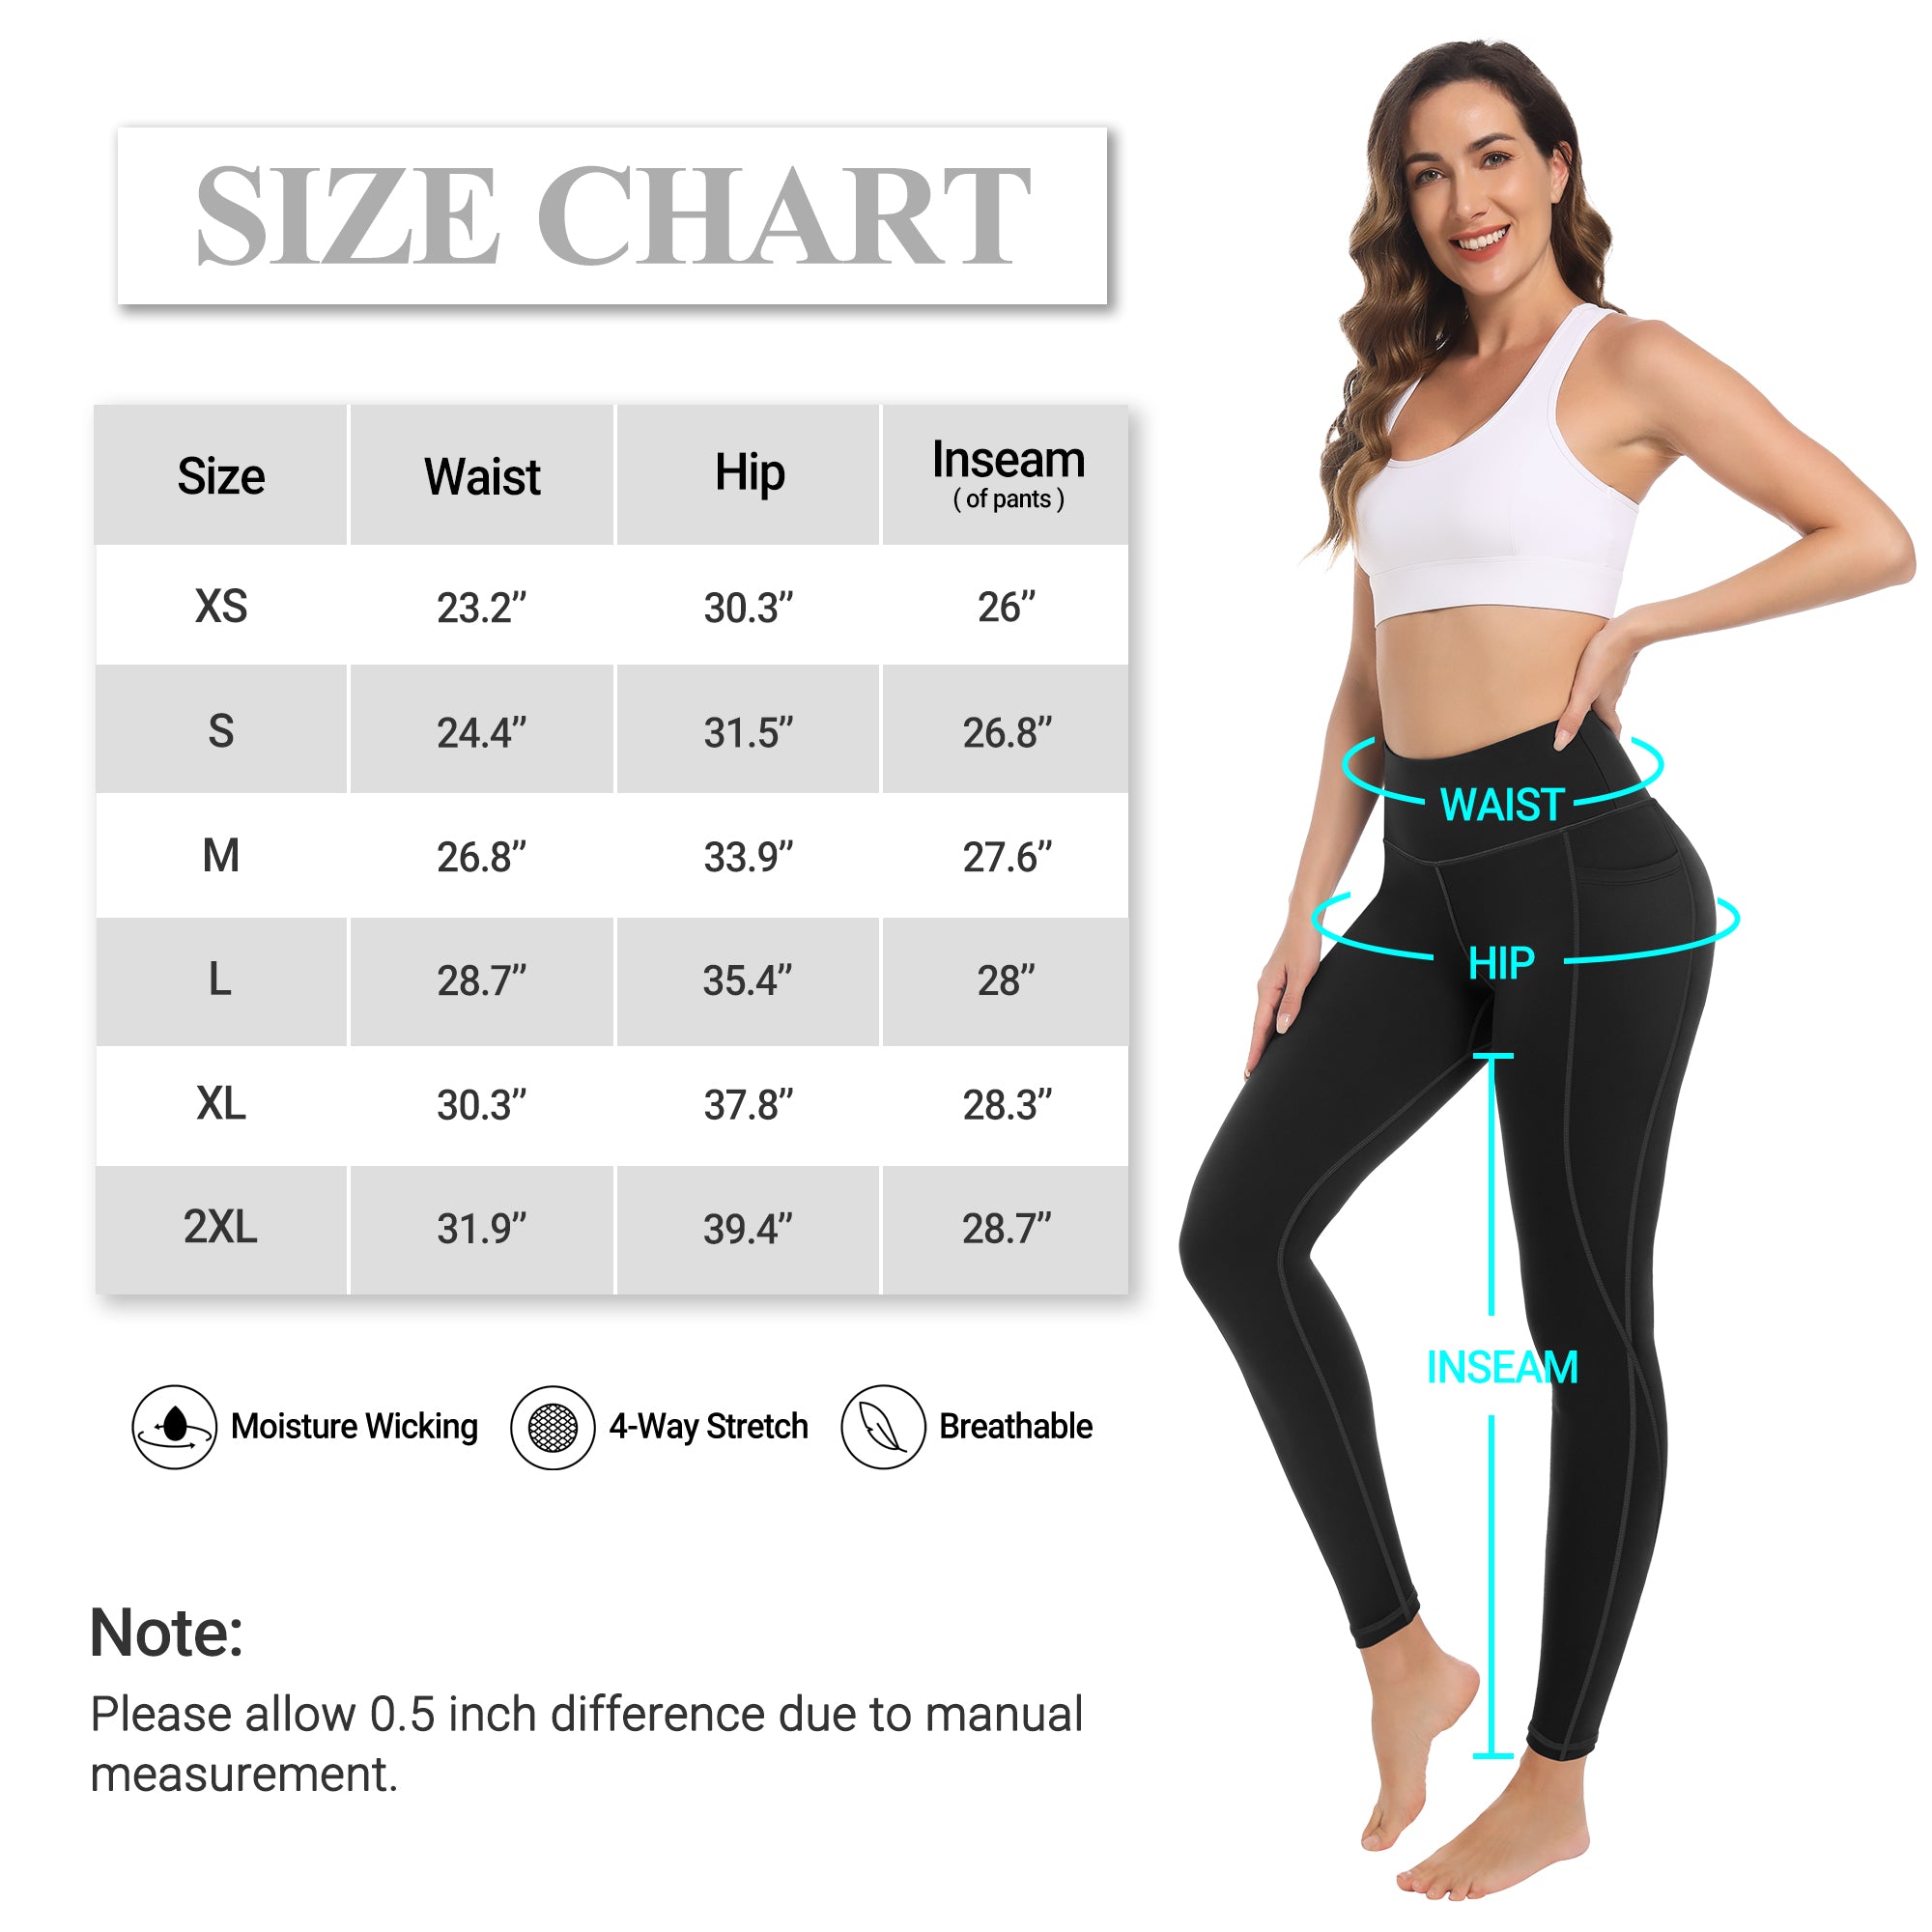 GOFIEP Yoga Leggings with Pockets for Women - High Waist Tummy Control Pants for Workout